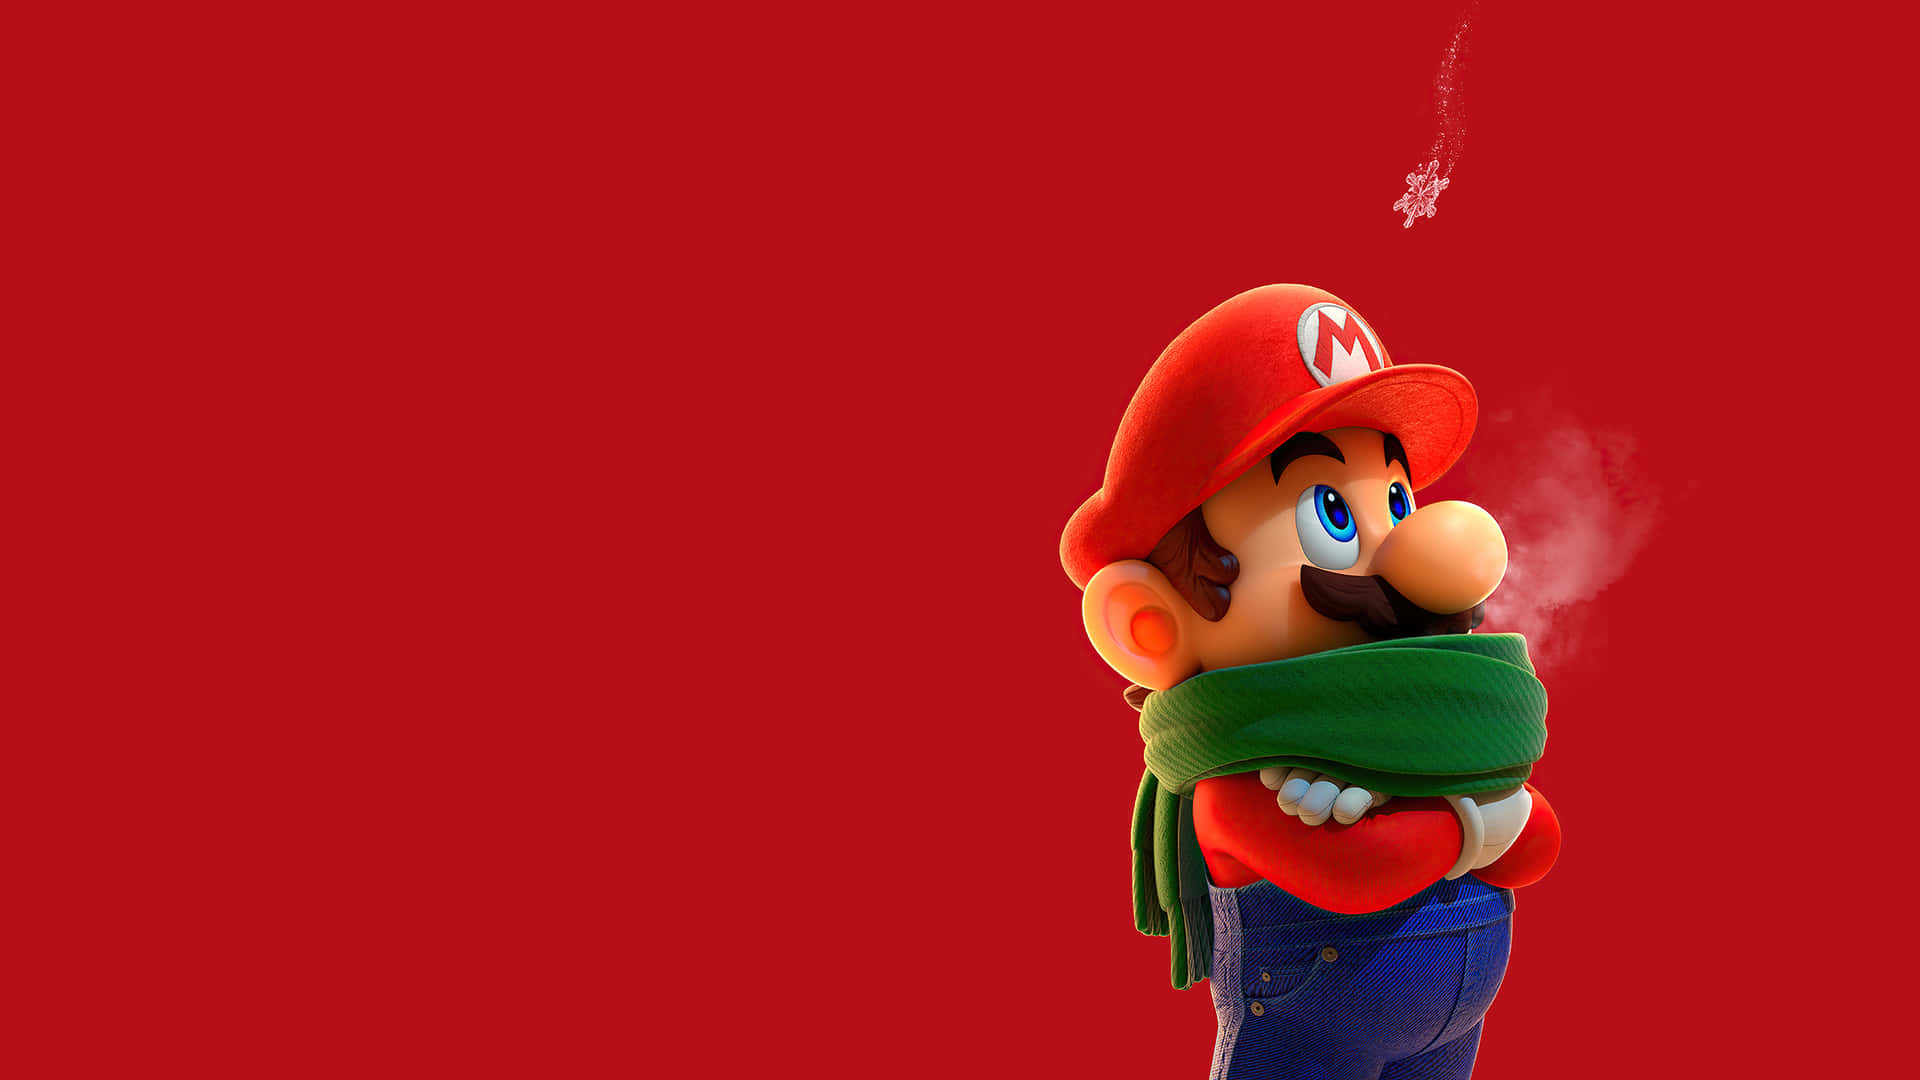 A Mario Character With A Scarf And A Red Background Wallpaper